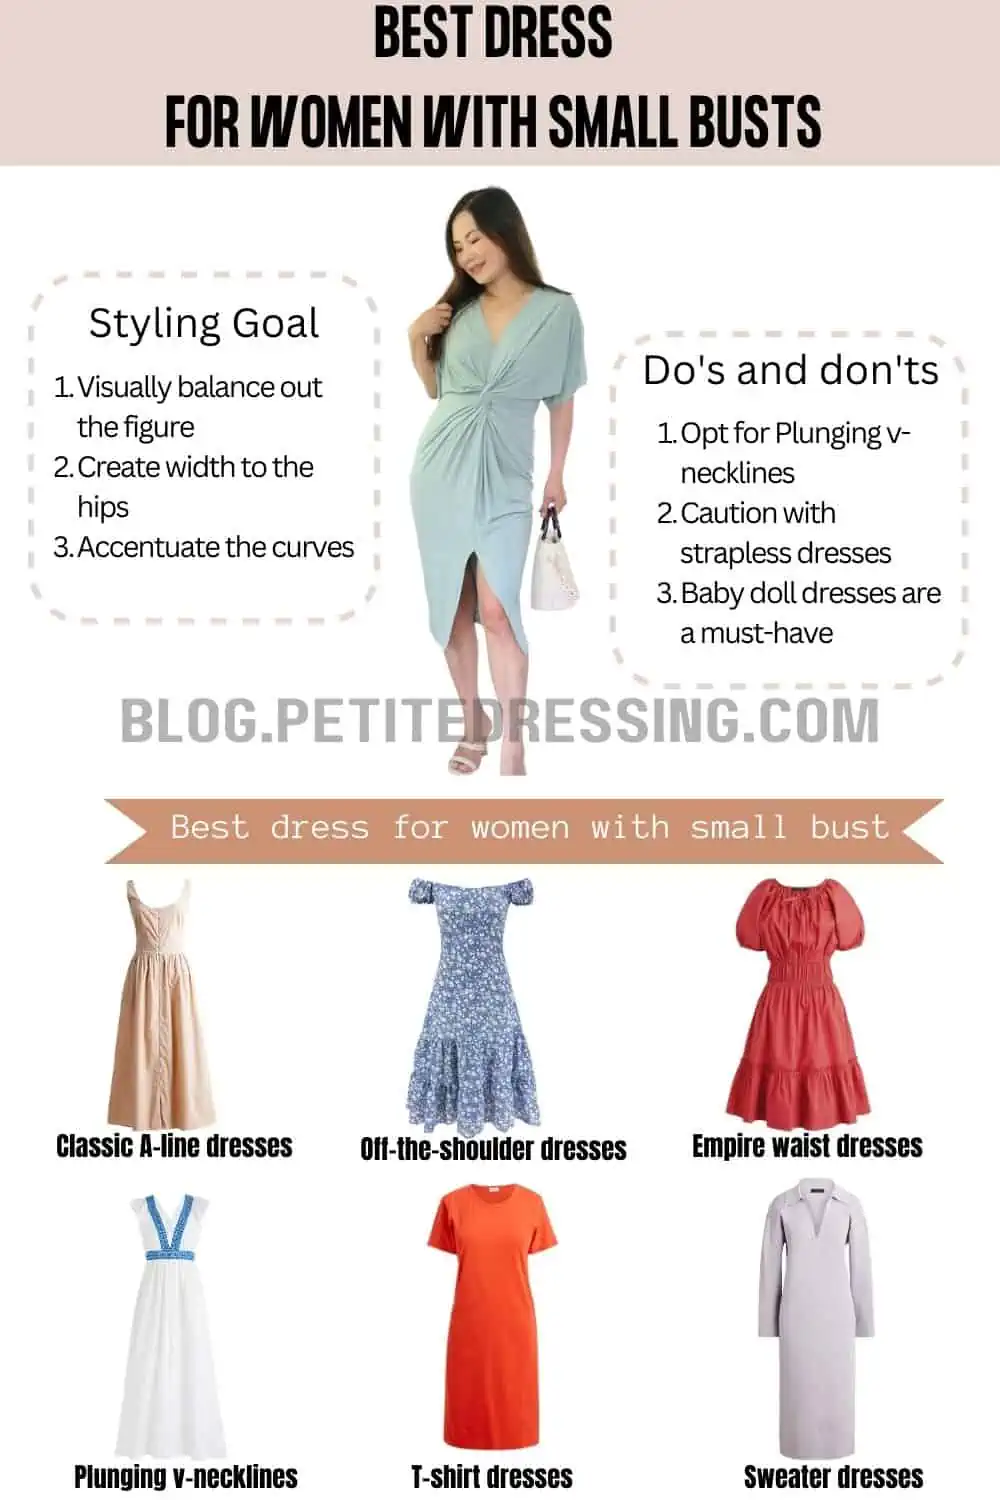 The Complete Tops Guide for Women With Small Bust - Petite Dressing